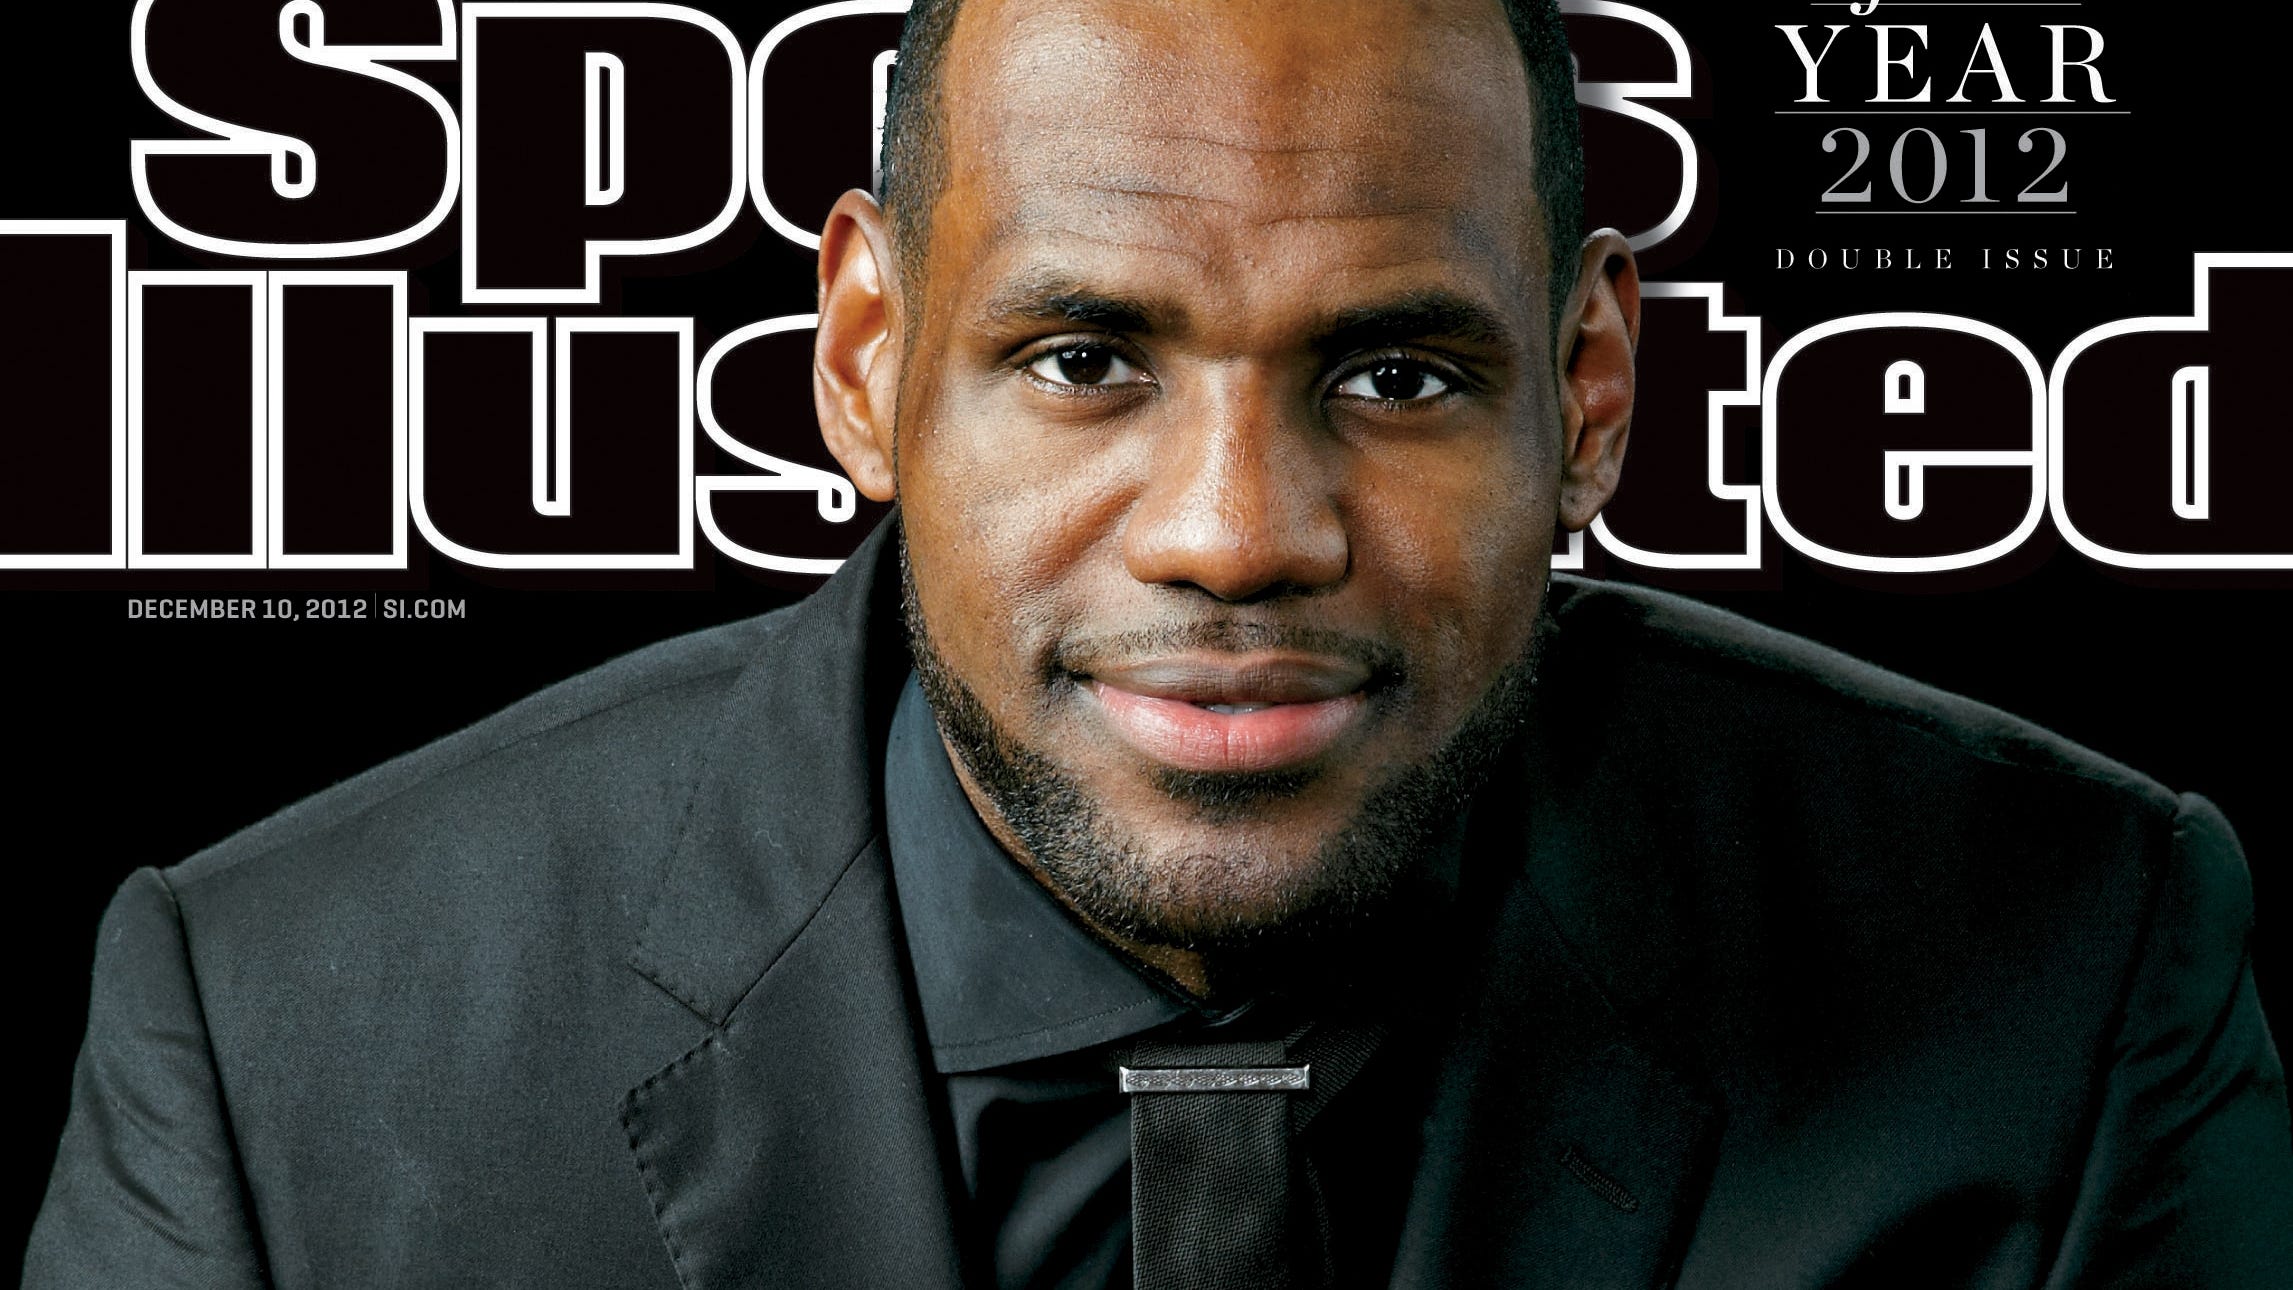 LEBRON JAMES 2012 SPORTS ILLUSTRATED 12/10/12 SPORTSMAN OF THE YEAR 